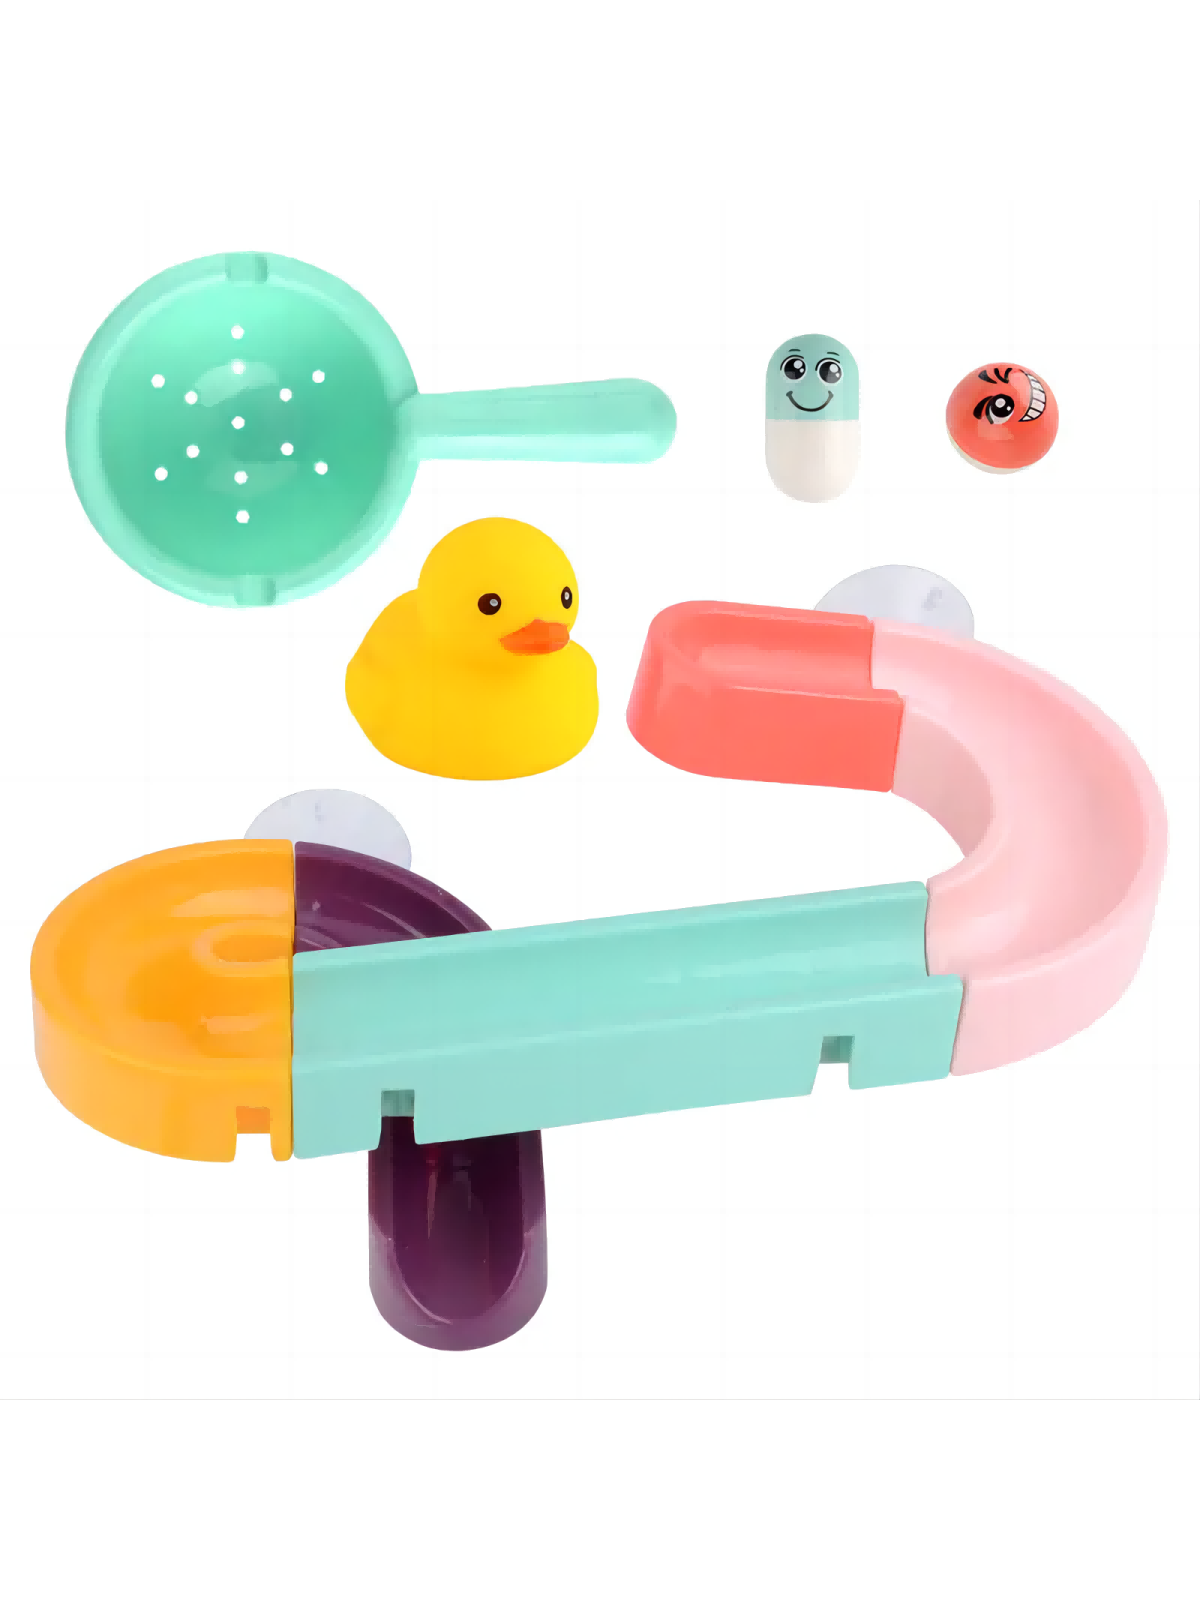 Baby Bath Toys, Rainbow Cloud Spray Water, Can Be Sucked Onto Walls Or Glass,Bath Toy For Kids, Water Playing Toy, Baby Stuff Clearance, Make Babies Fall In Love With Bathing